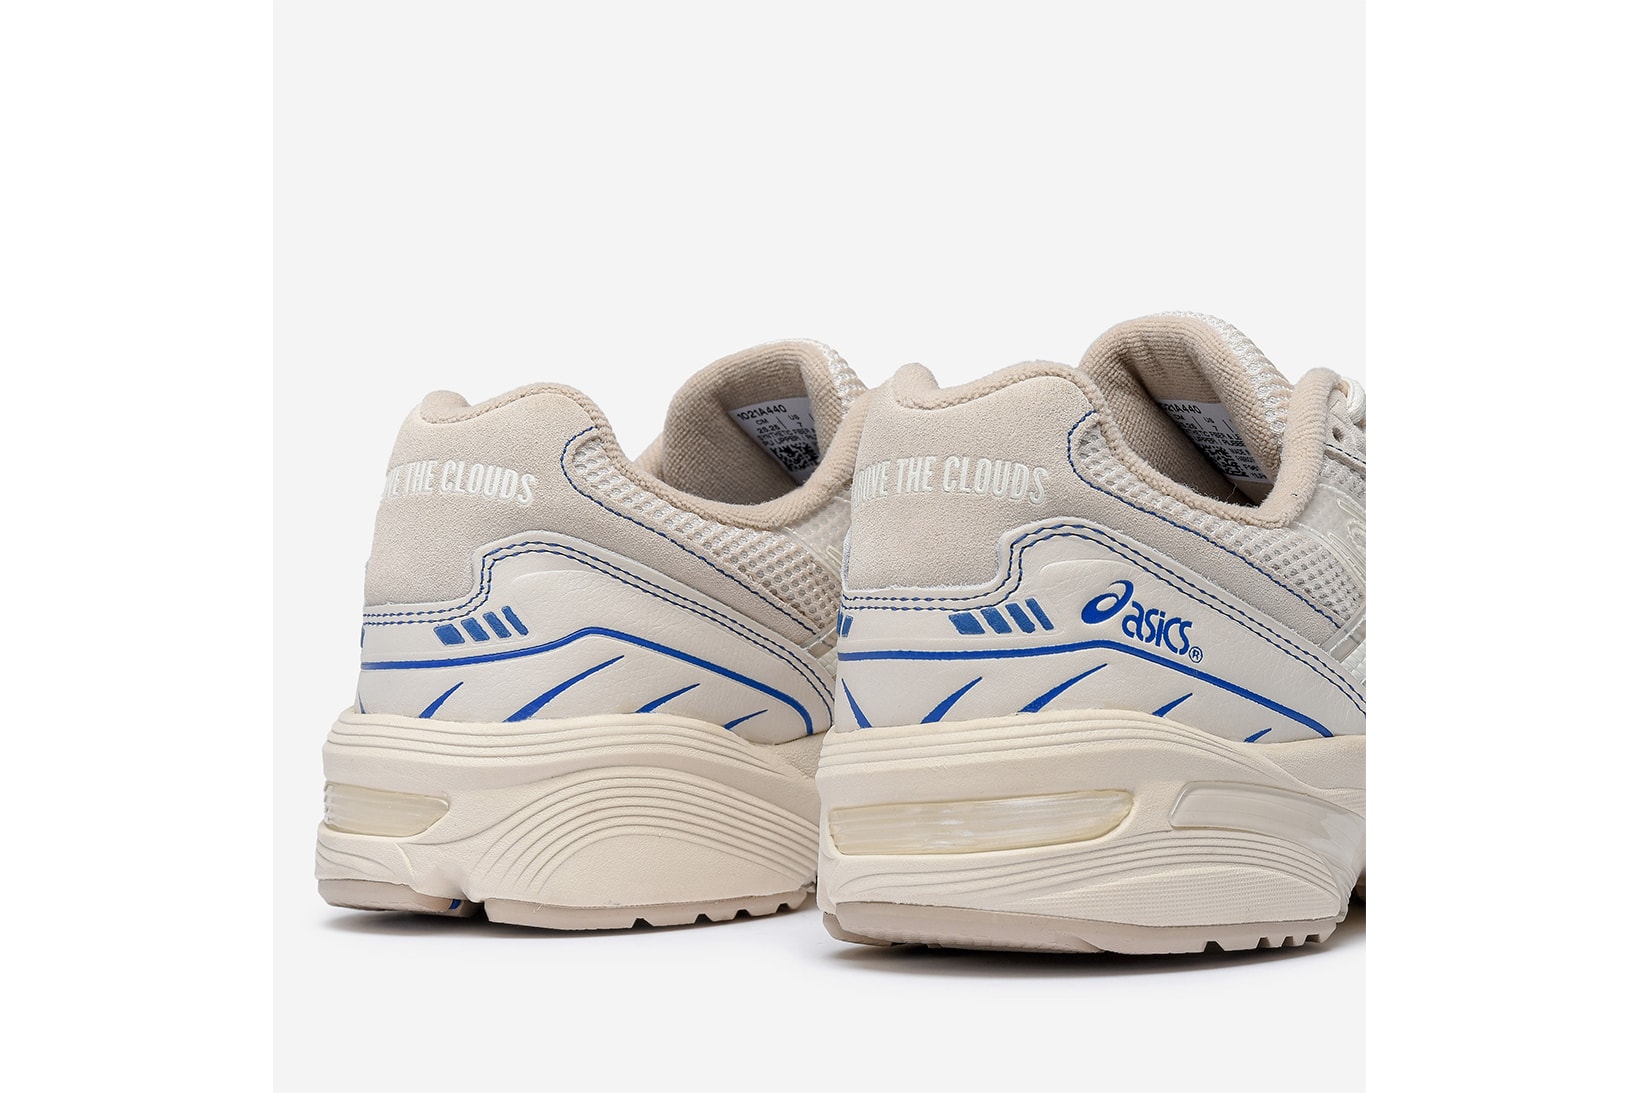 ASICS Above The Clouds GEL-1090 Collaboration White Sneakers 